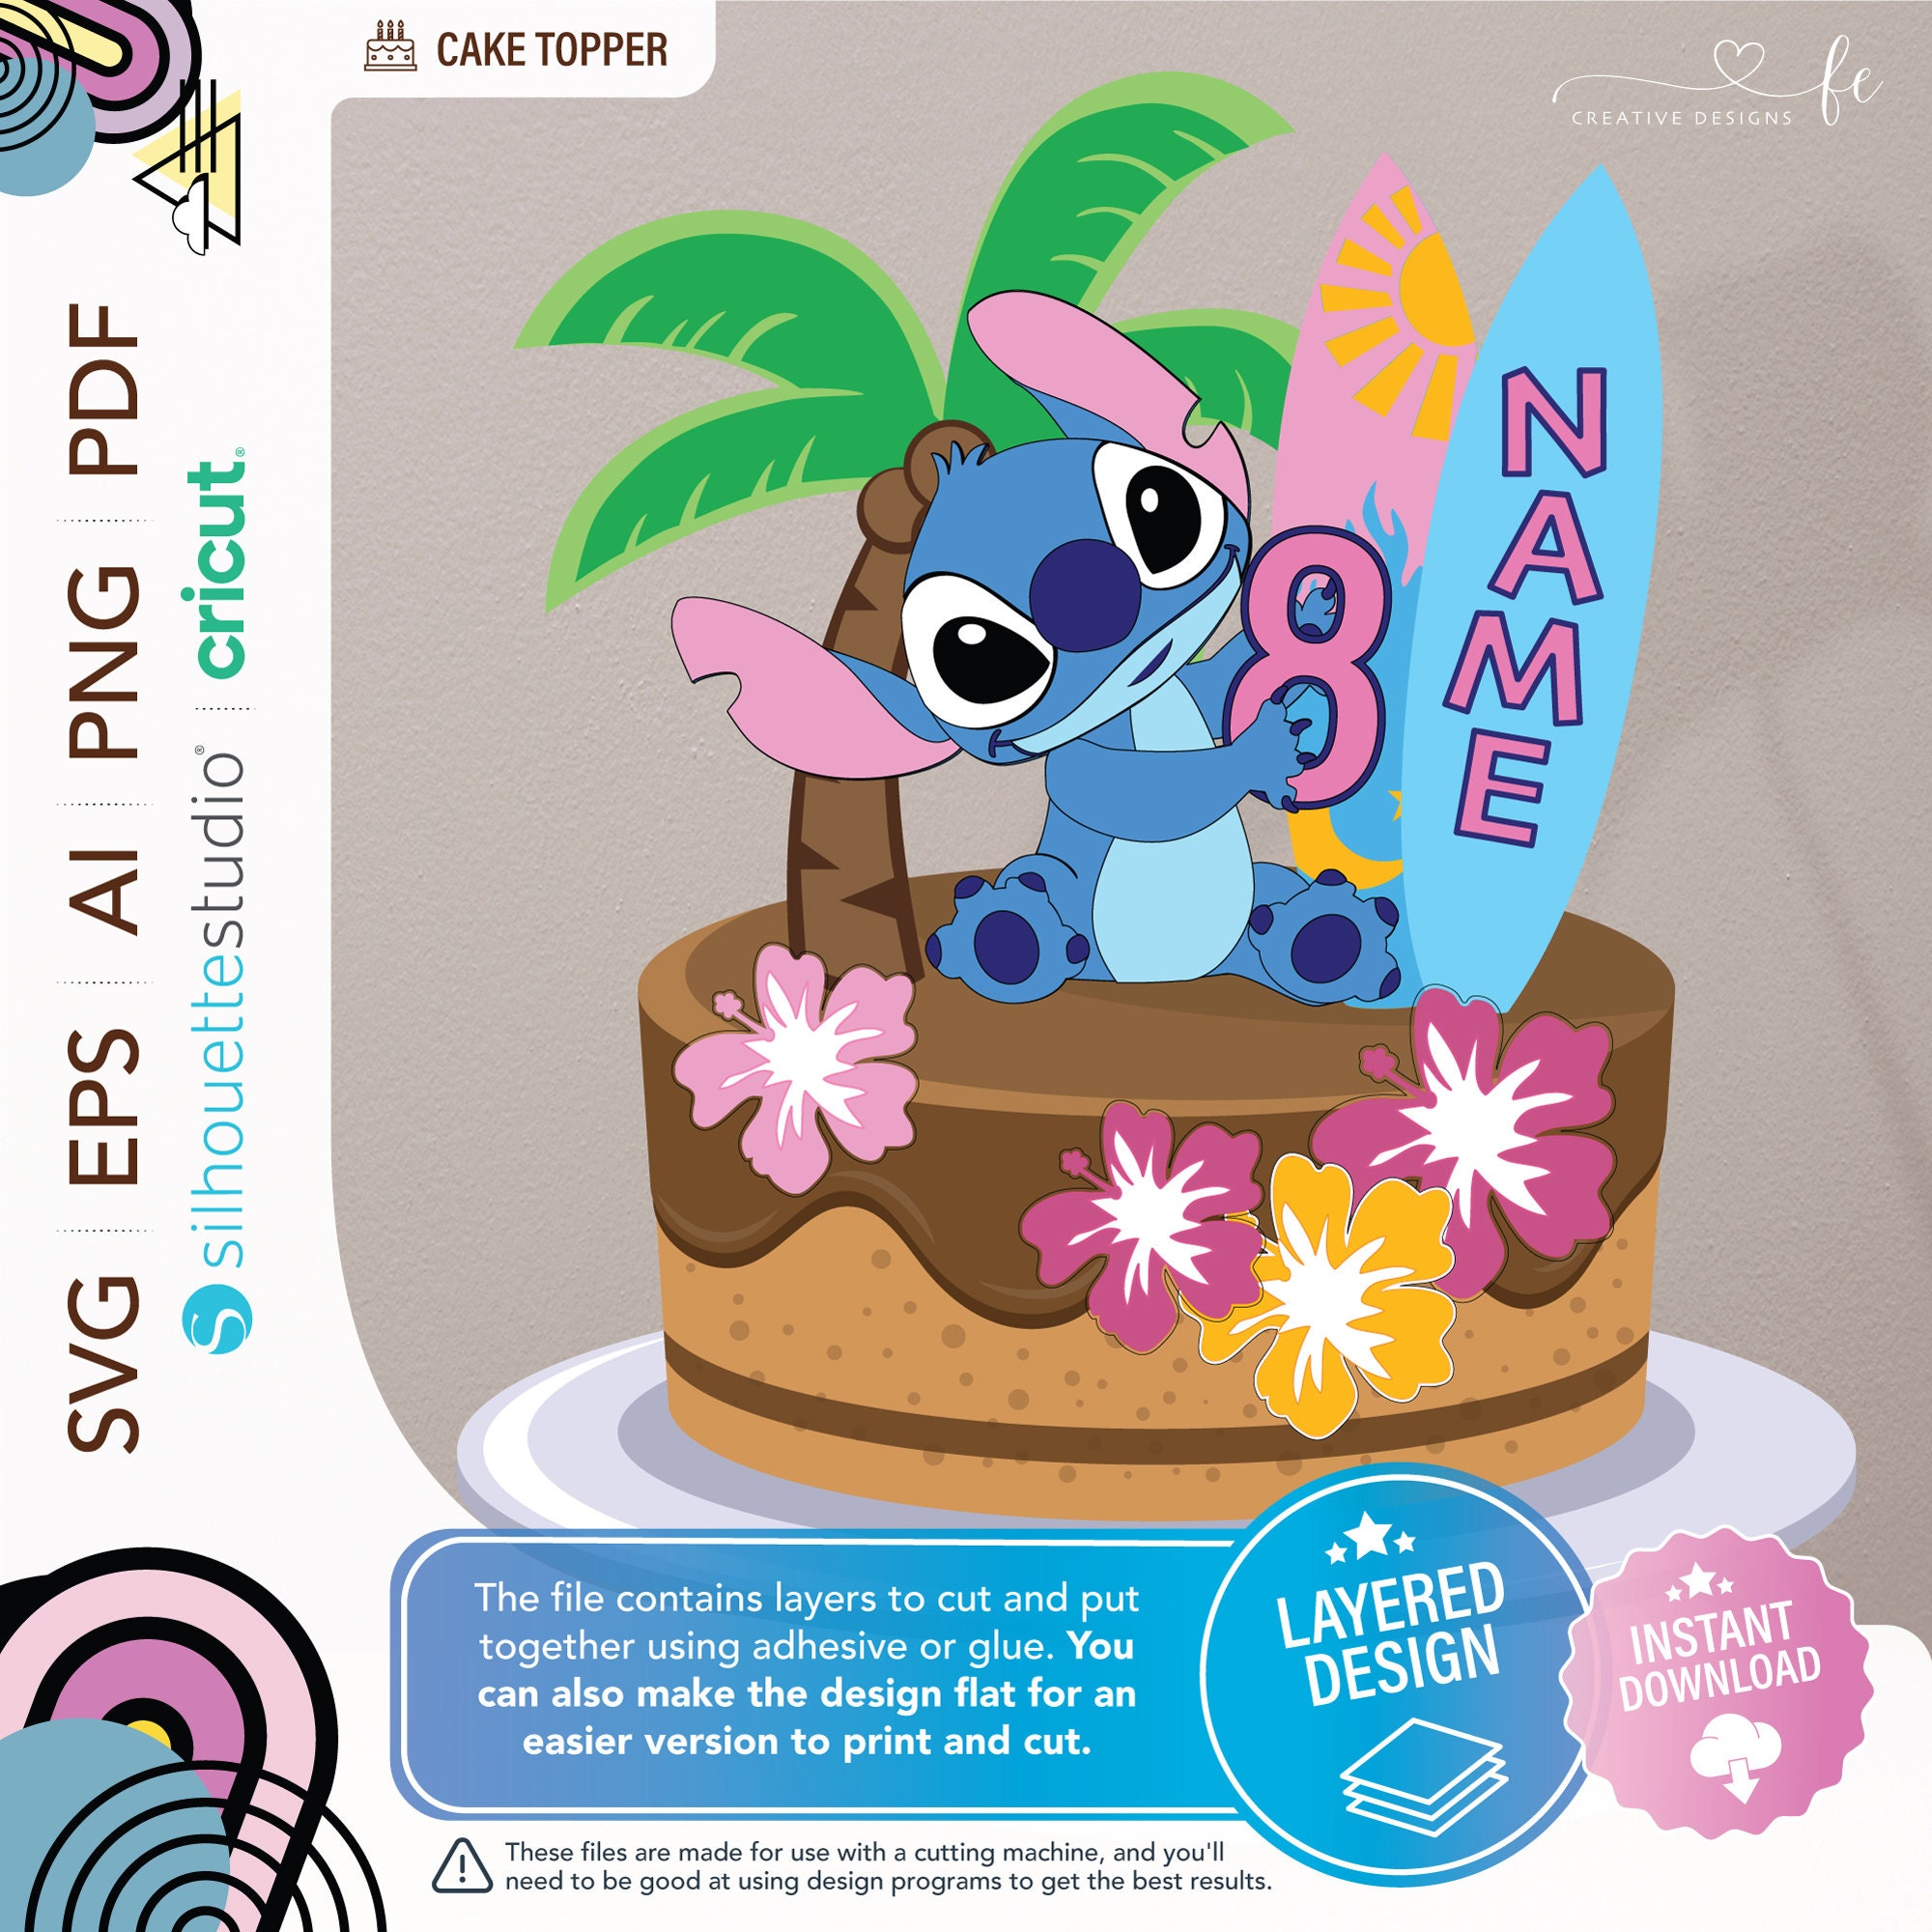 Stitch Cake Topper - Decorated Cake by Leigh Medway - CakesDecor